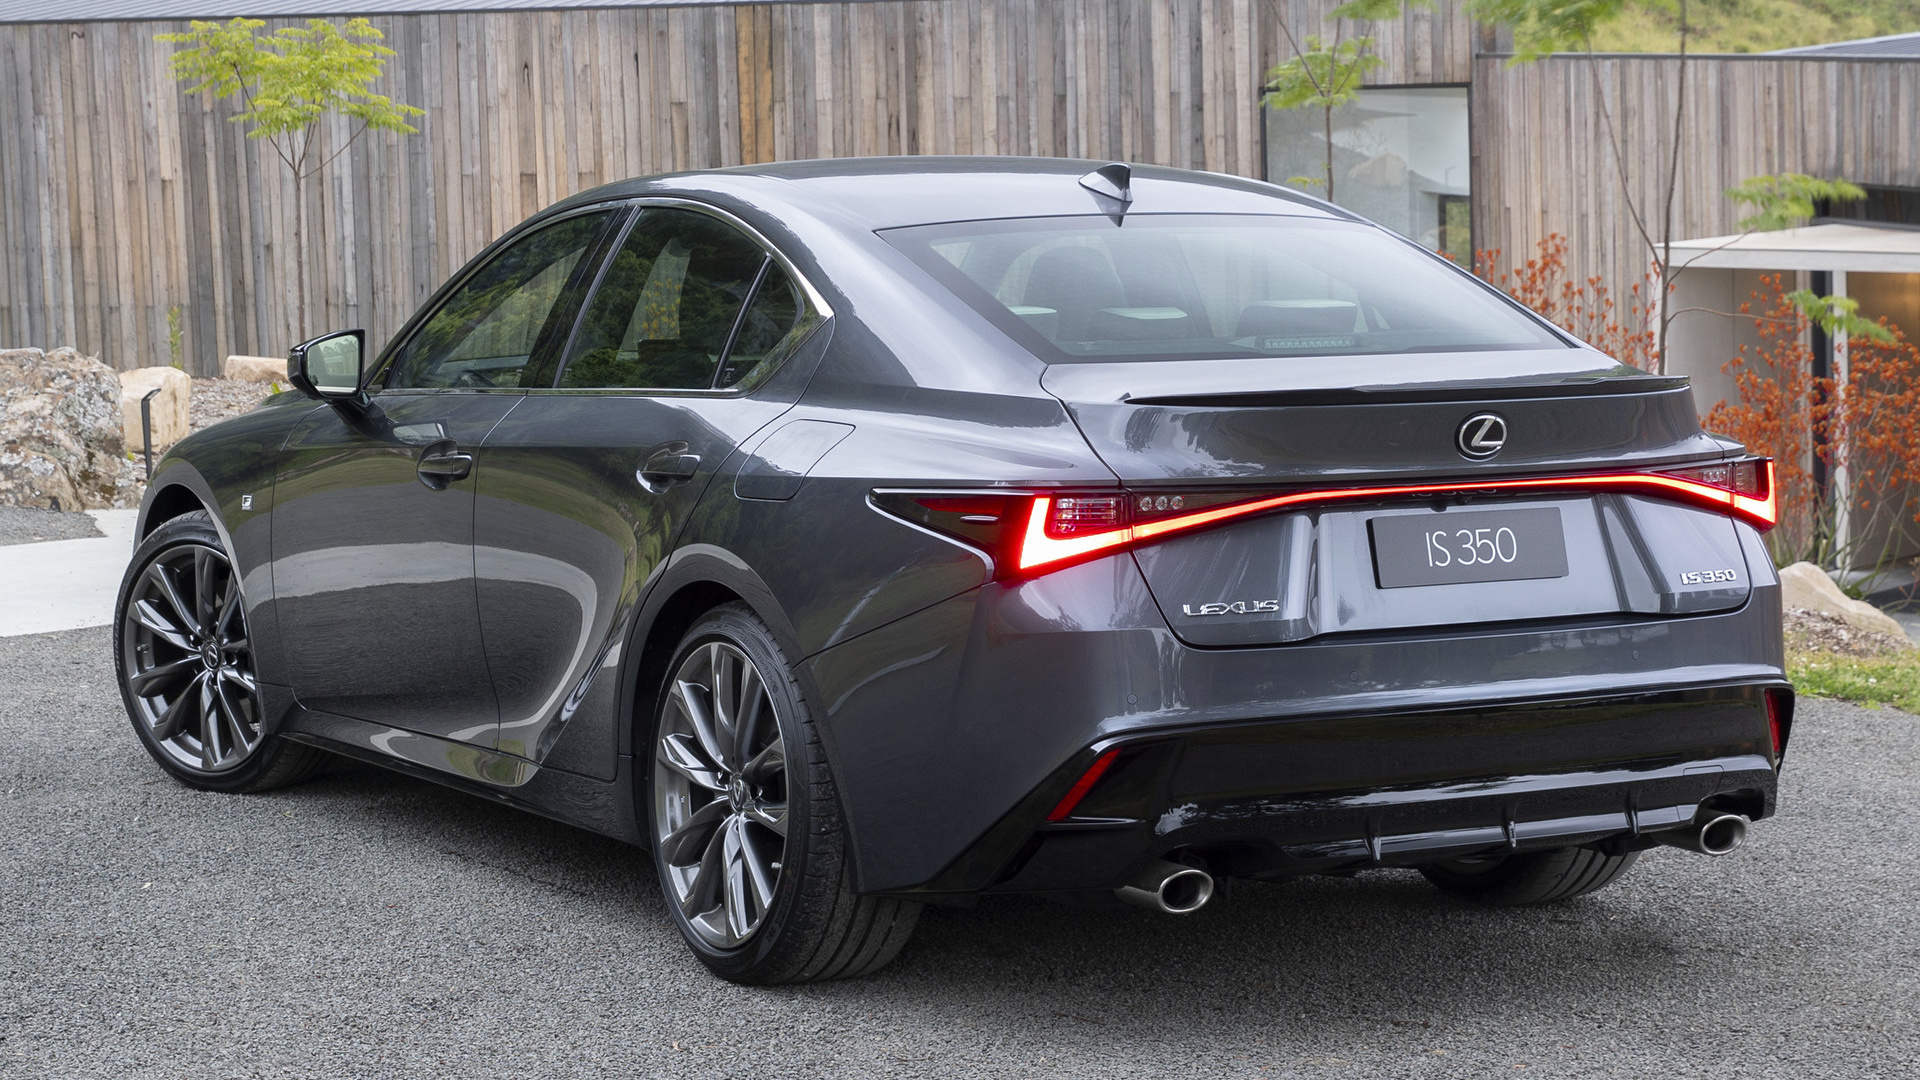 2021 Lexus IS F Sport (AU) Wallpapers and HD Images